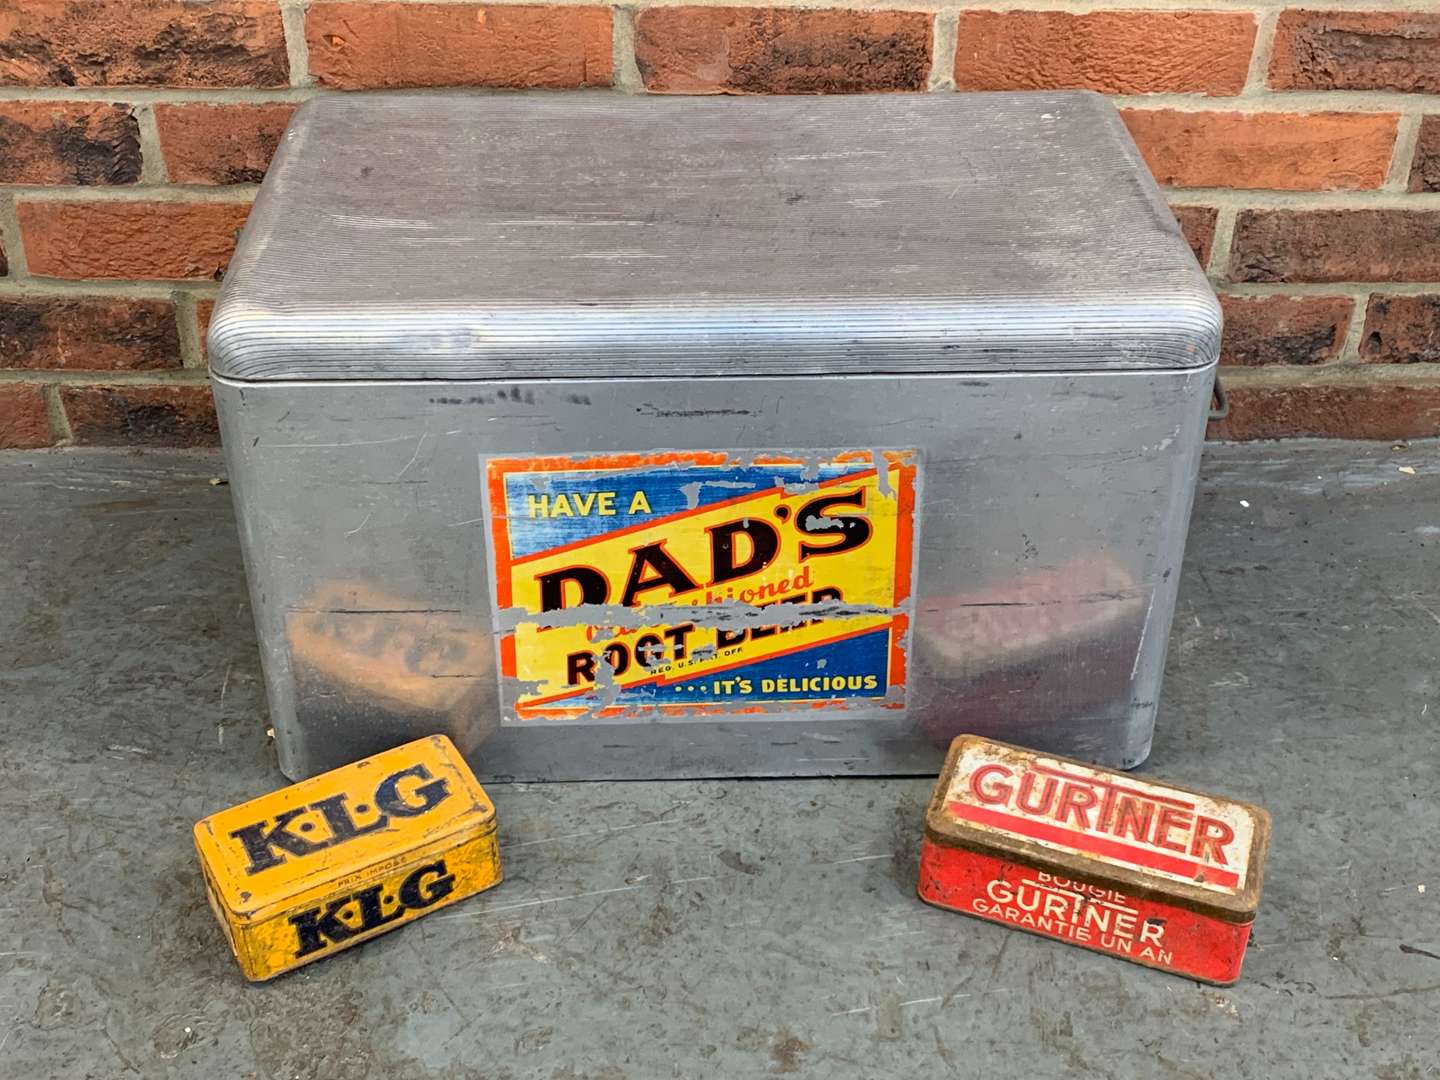 <p>American “Dads” Root Beer Cooler, KLG and Gurtner Tins (3)</p>